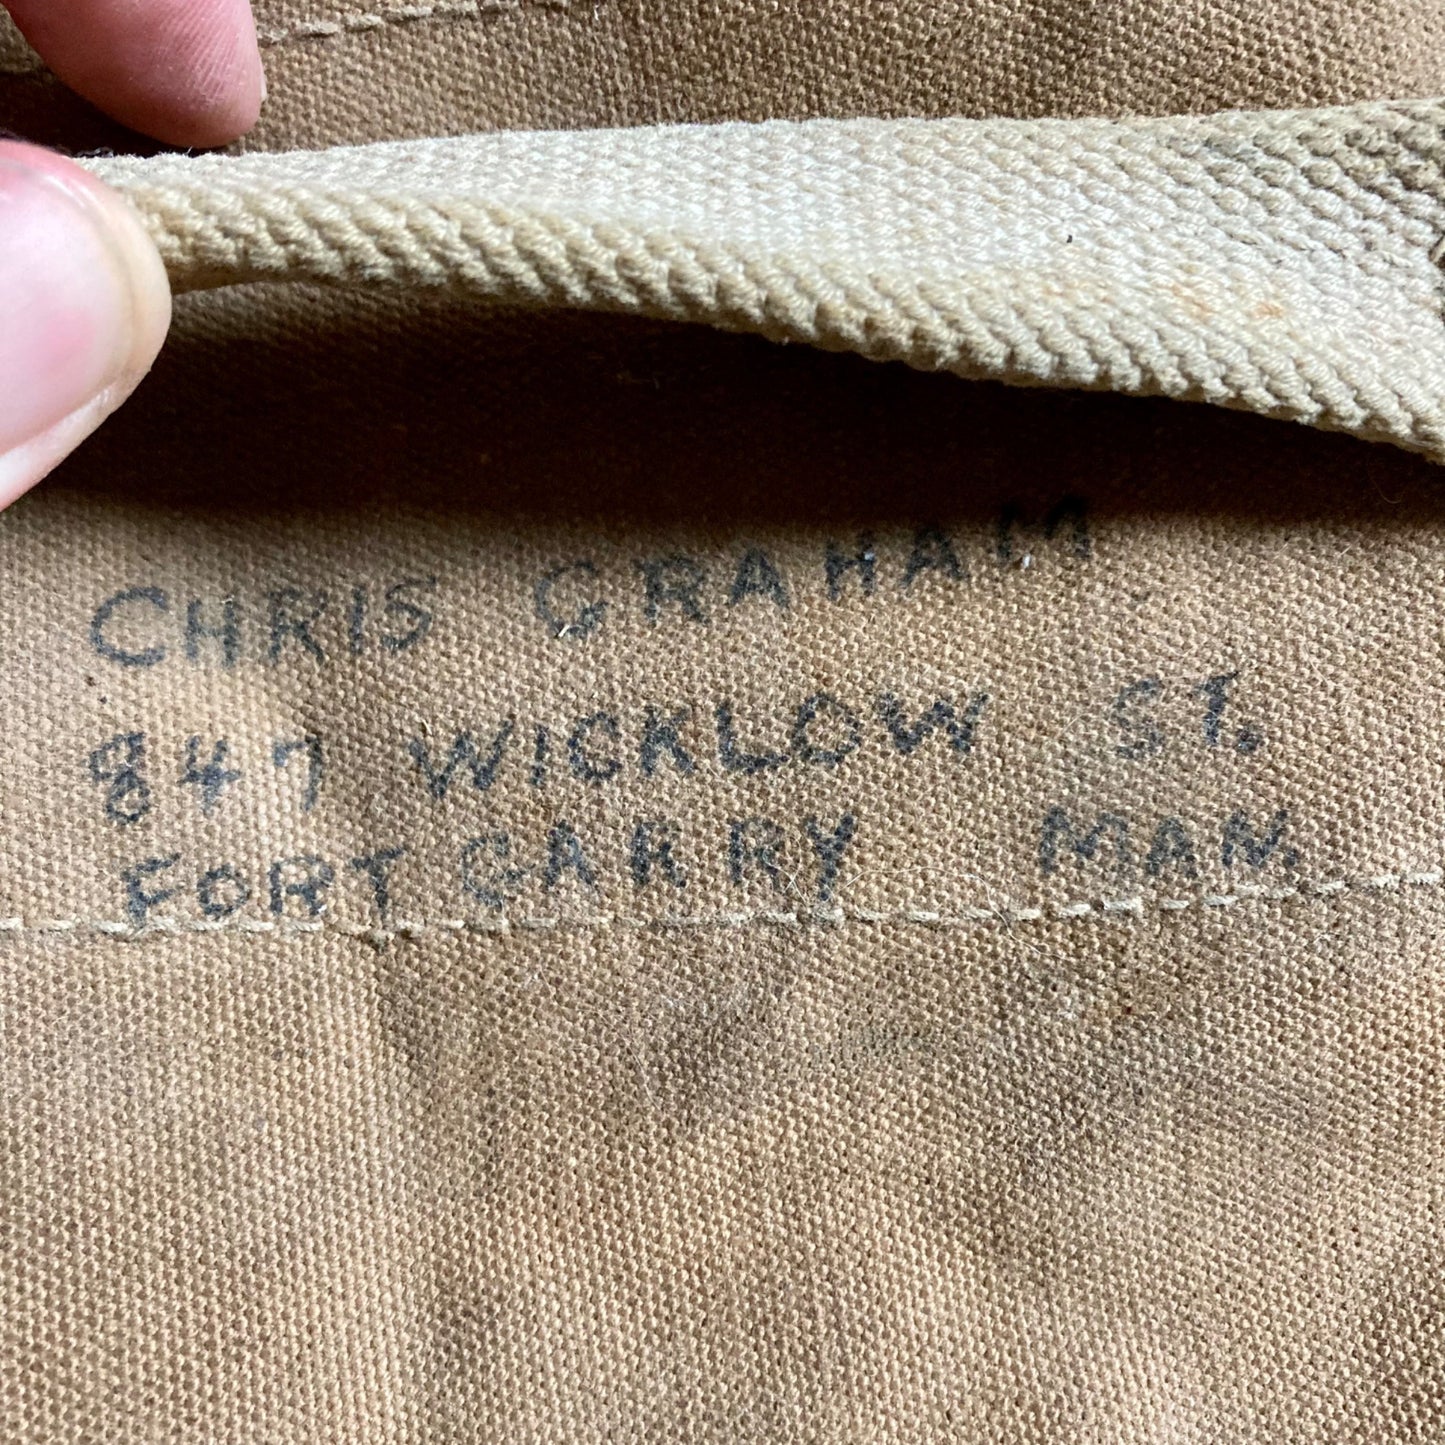 Vintage Military Duffel Bag War Assets Corporation Brown Canvas Army